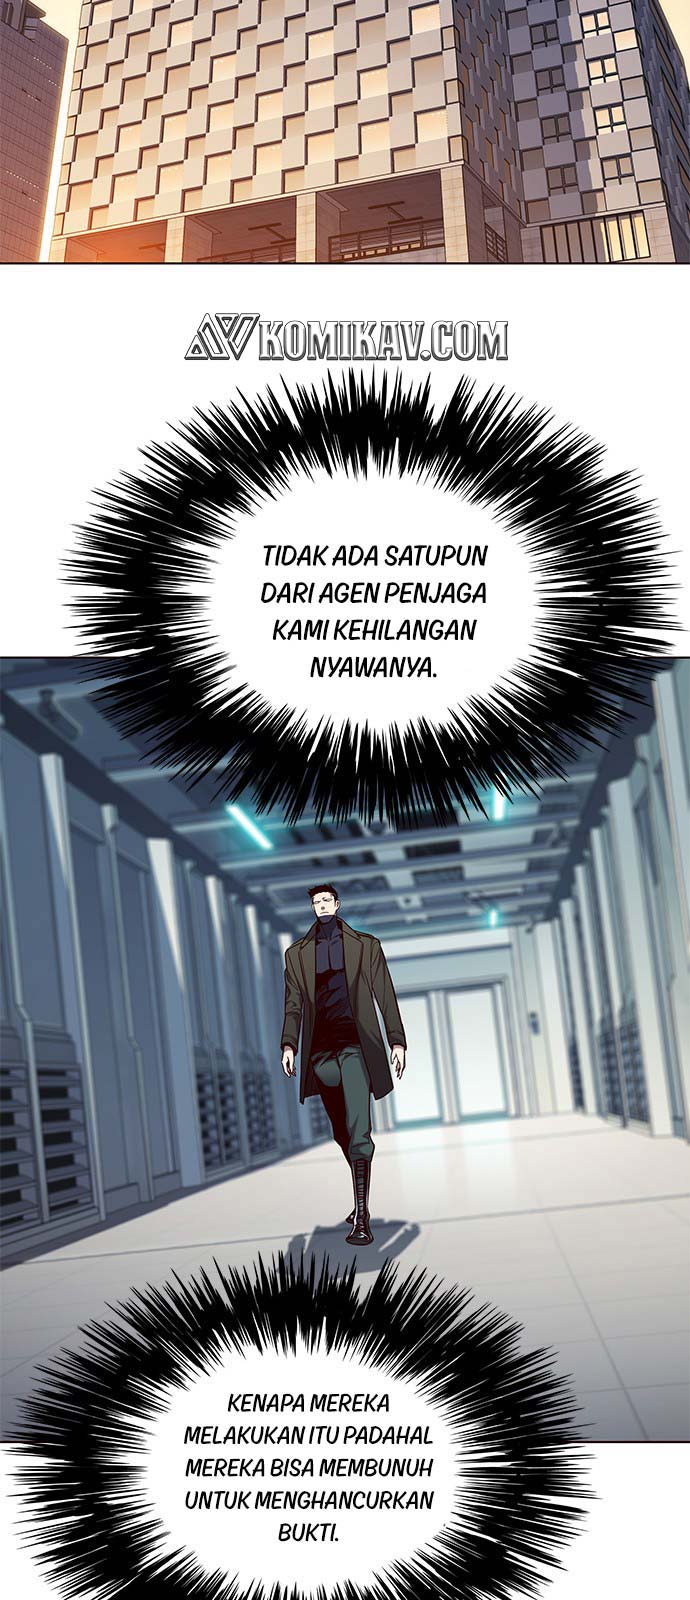 Eleceed Chapter 104